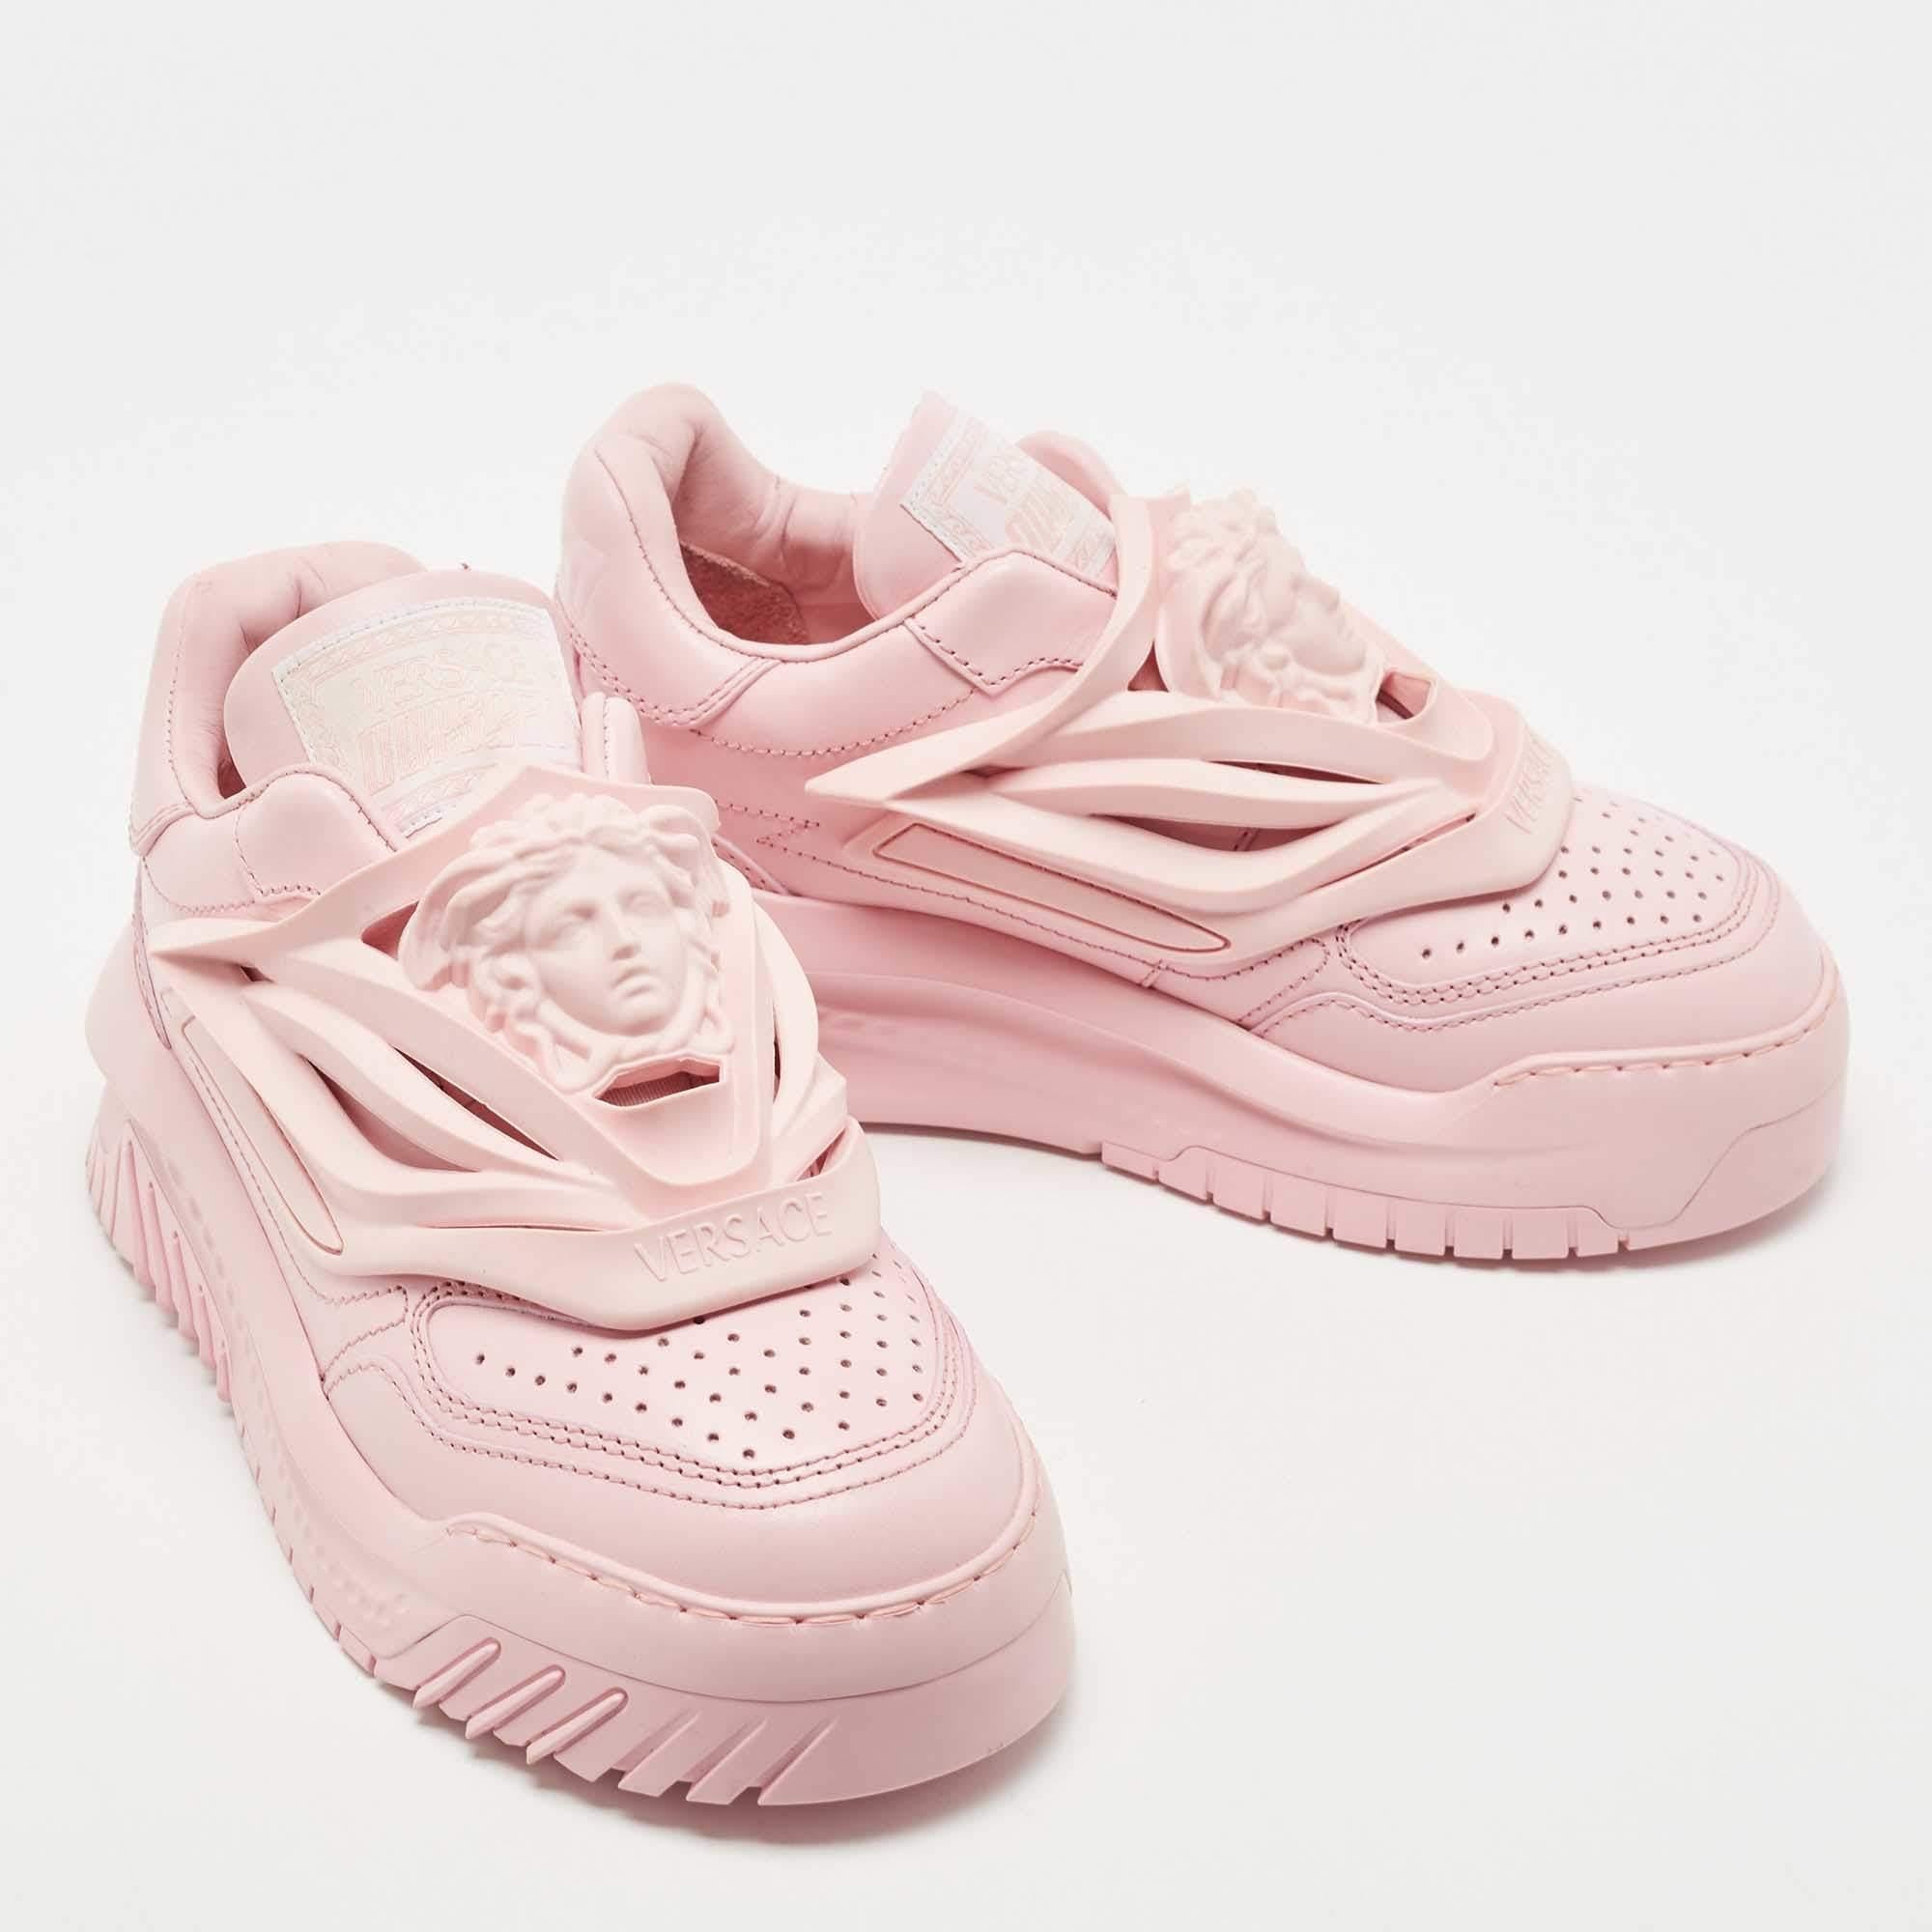 Versace Pink Leather and Rubber Medusa Odissea Caged Low Top Sneakers Size 36 2